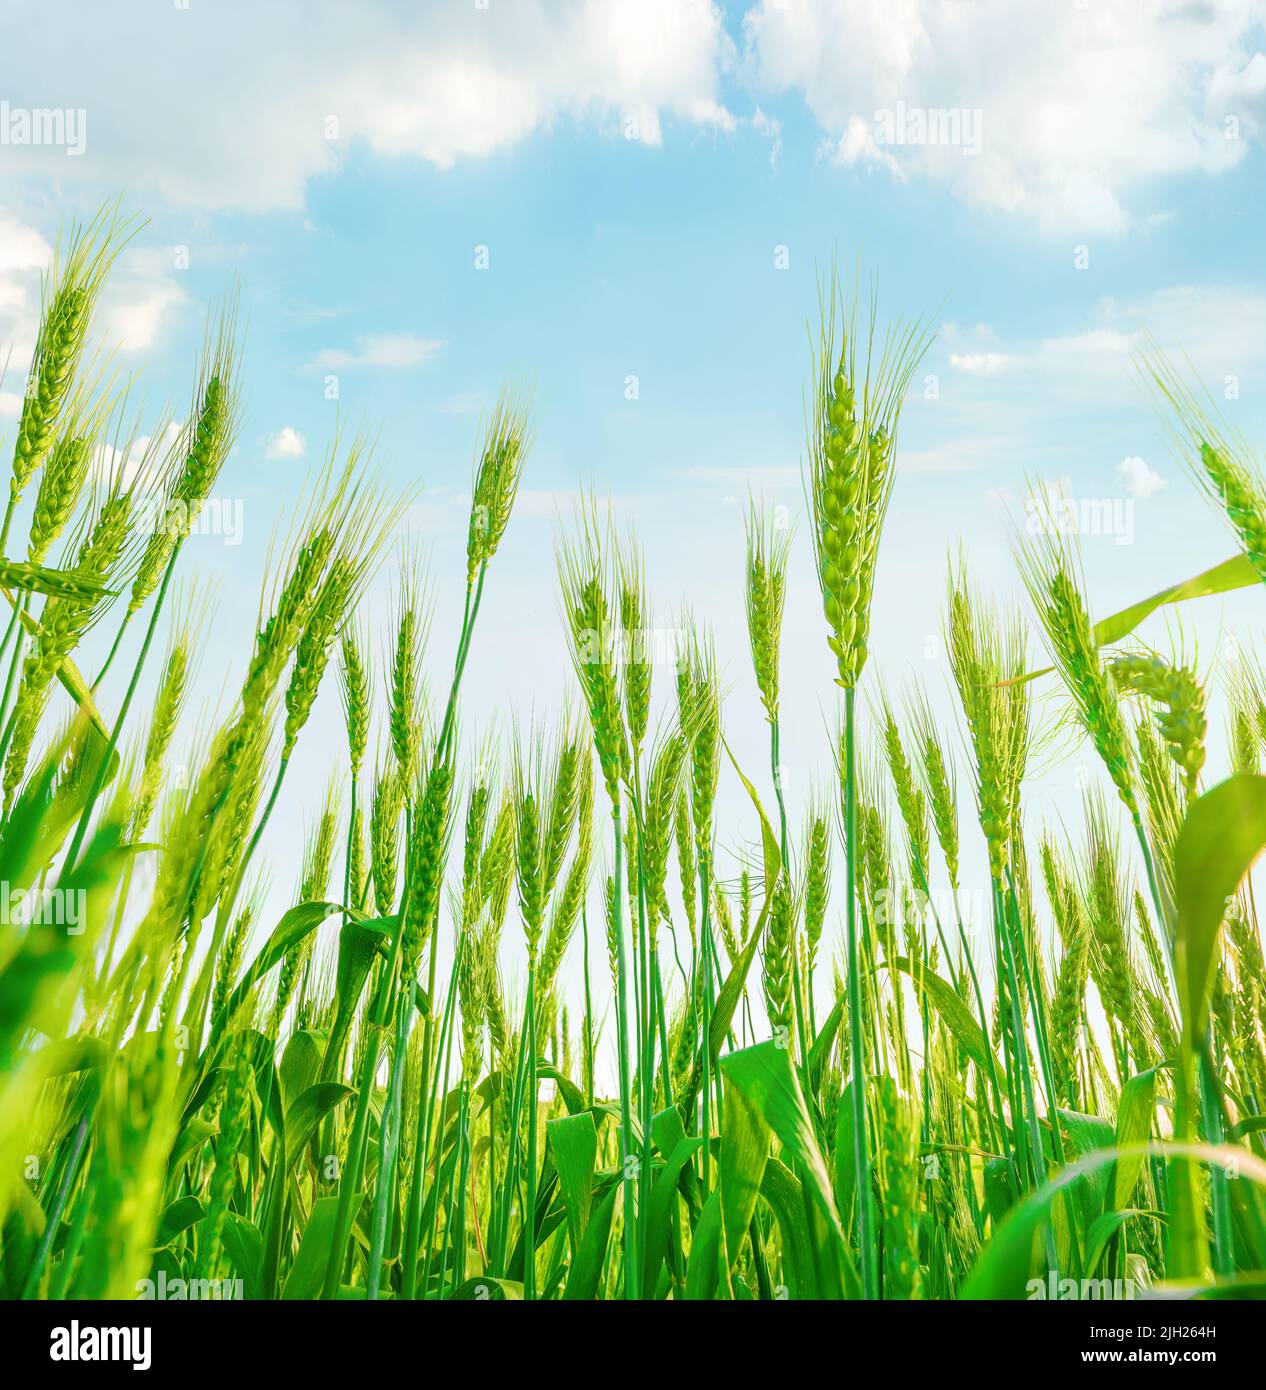 Ears of green wheat growing in field. View up against light blue sky with clouds Stock Photo